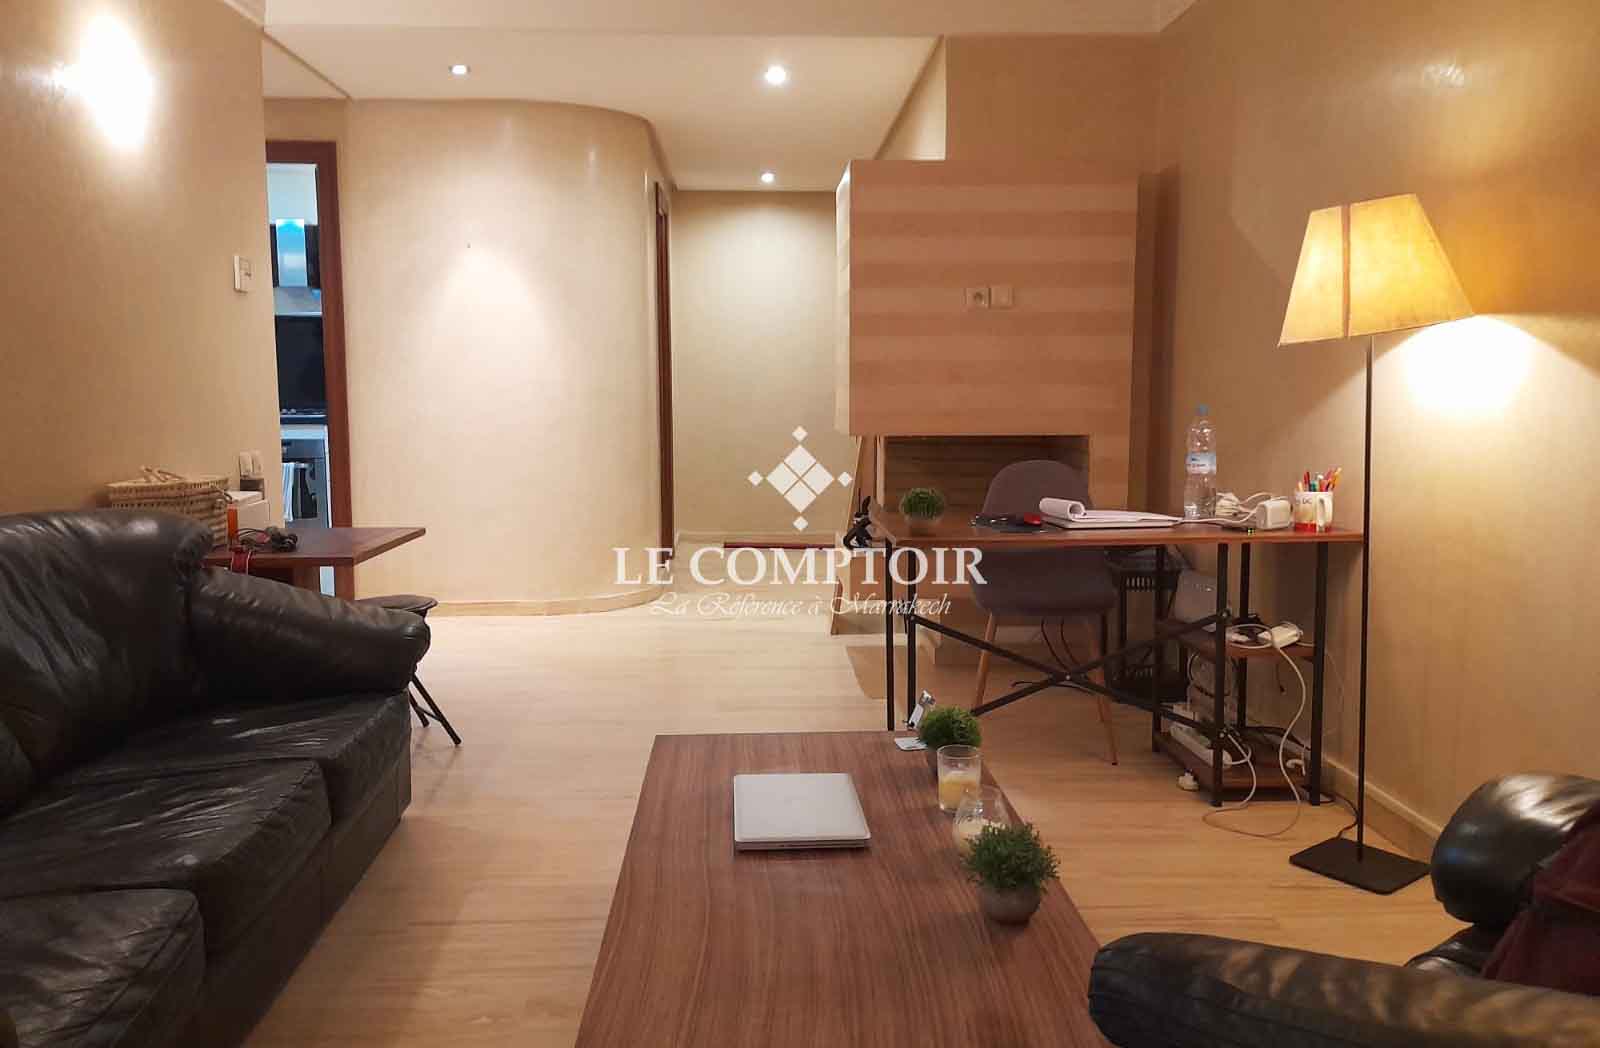 Le Comptoir Immobilier Agence Immobiliere Marrakech Location Appartement Camp El Ghoul Marrakech 6